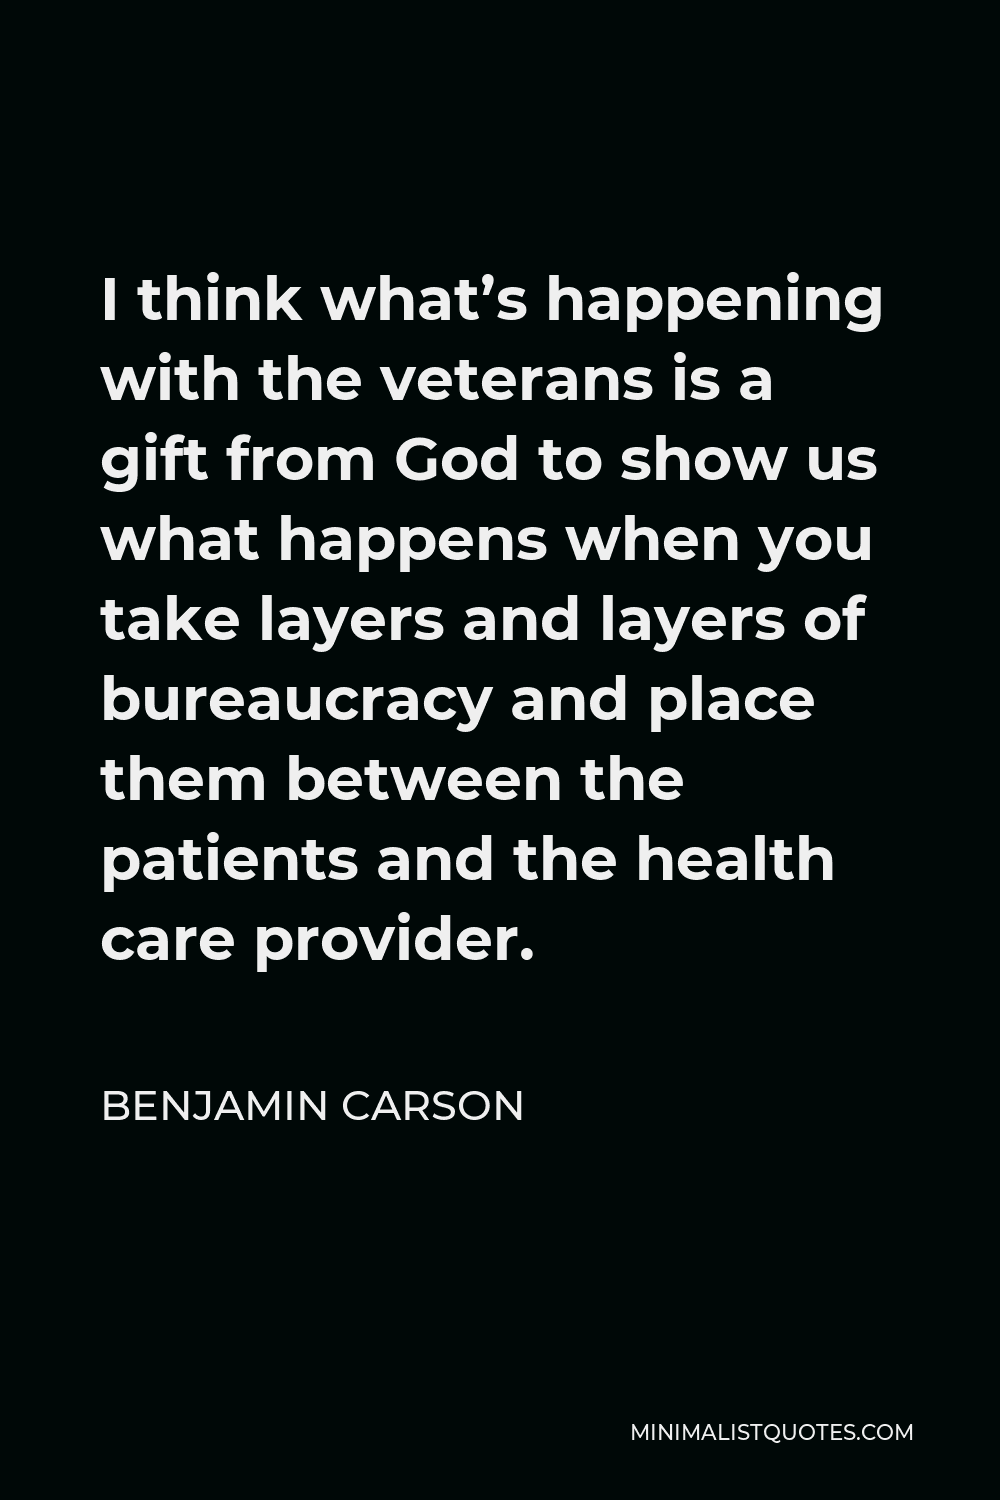 Benjamin Carson Quote - I think what’s happening with the veterans is a gift from God to show us what happens when you take layers and layers of bureaucracy and place them between the patients and the health care provider.